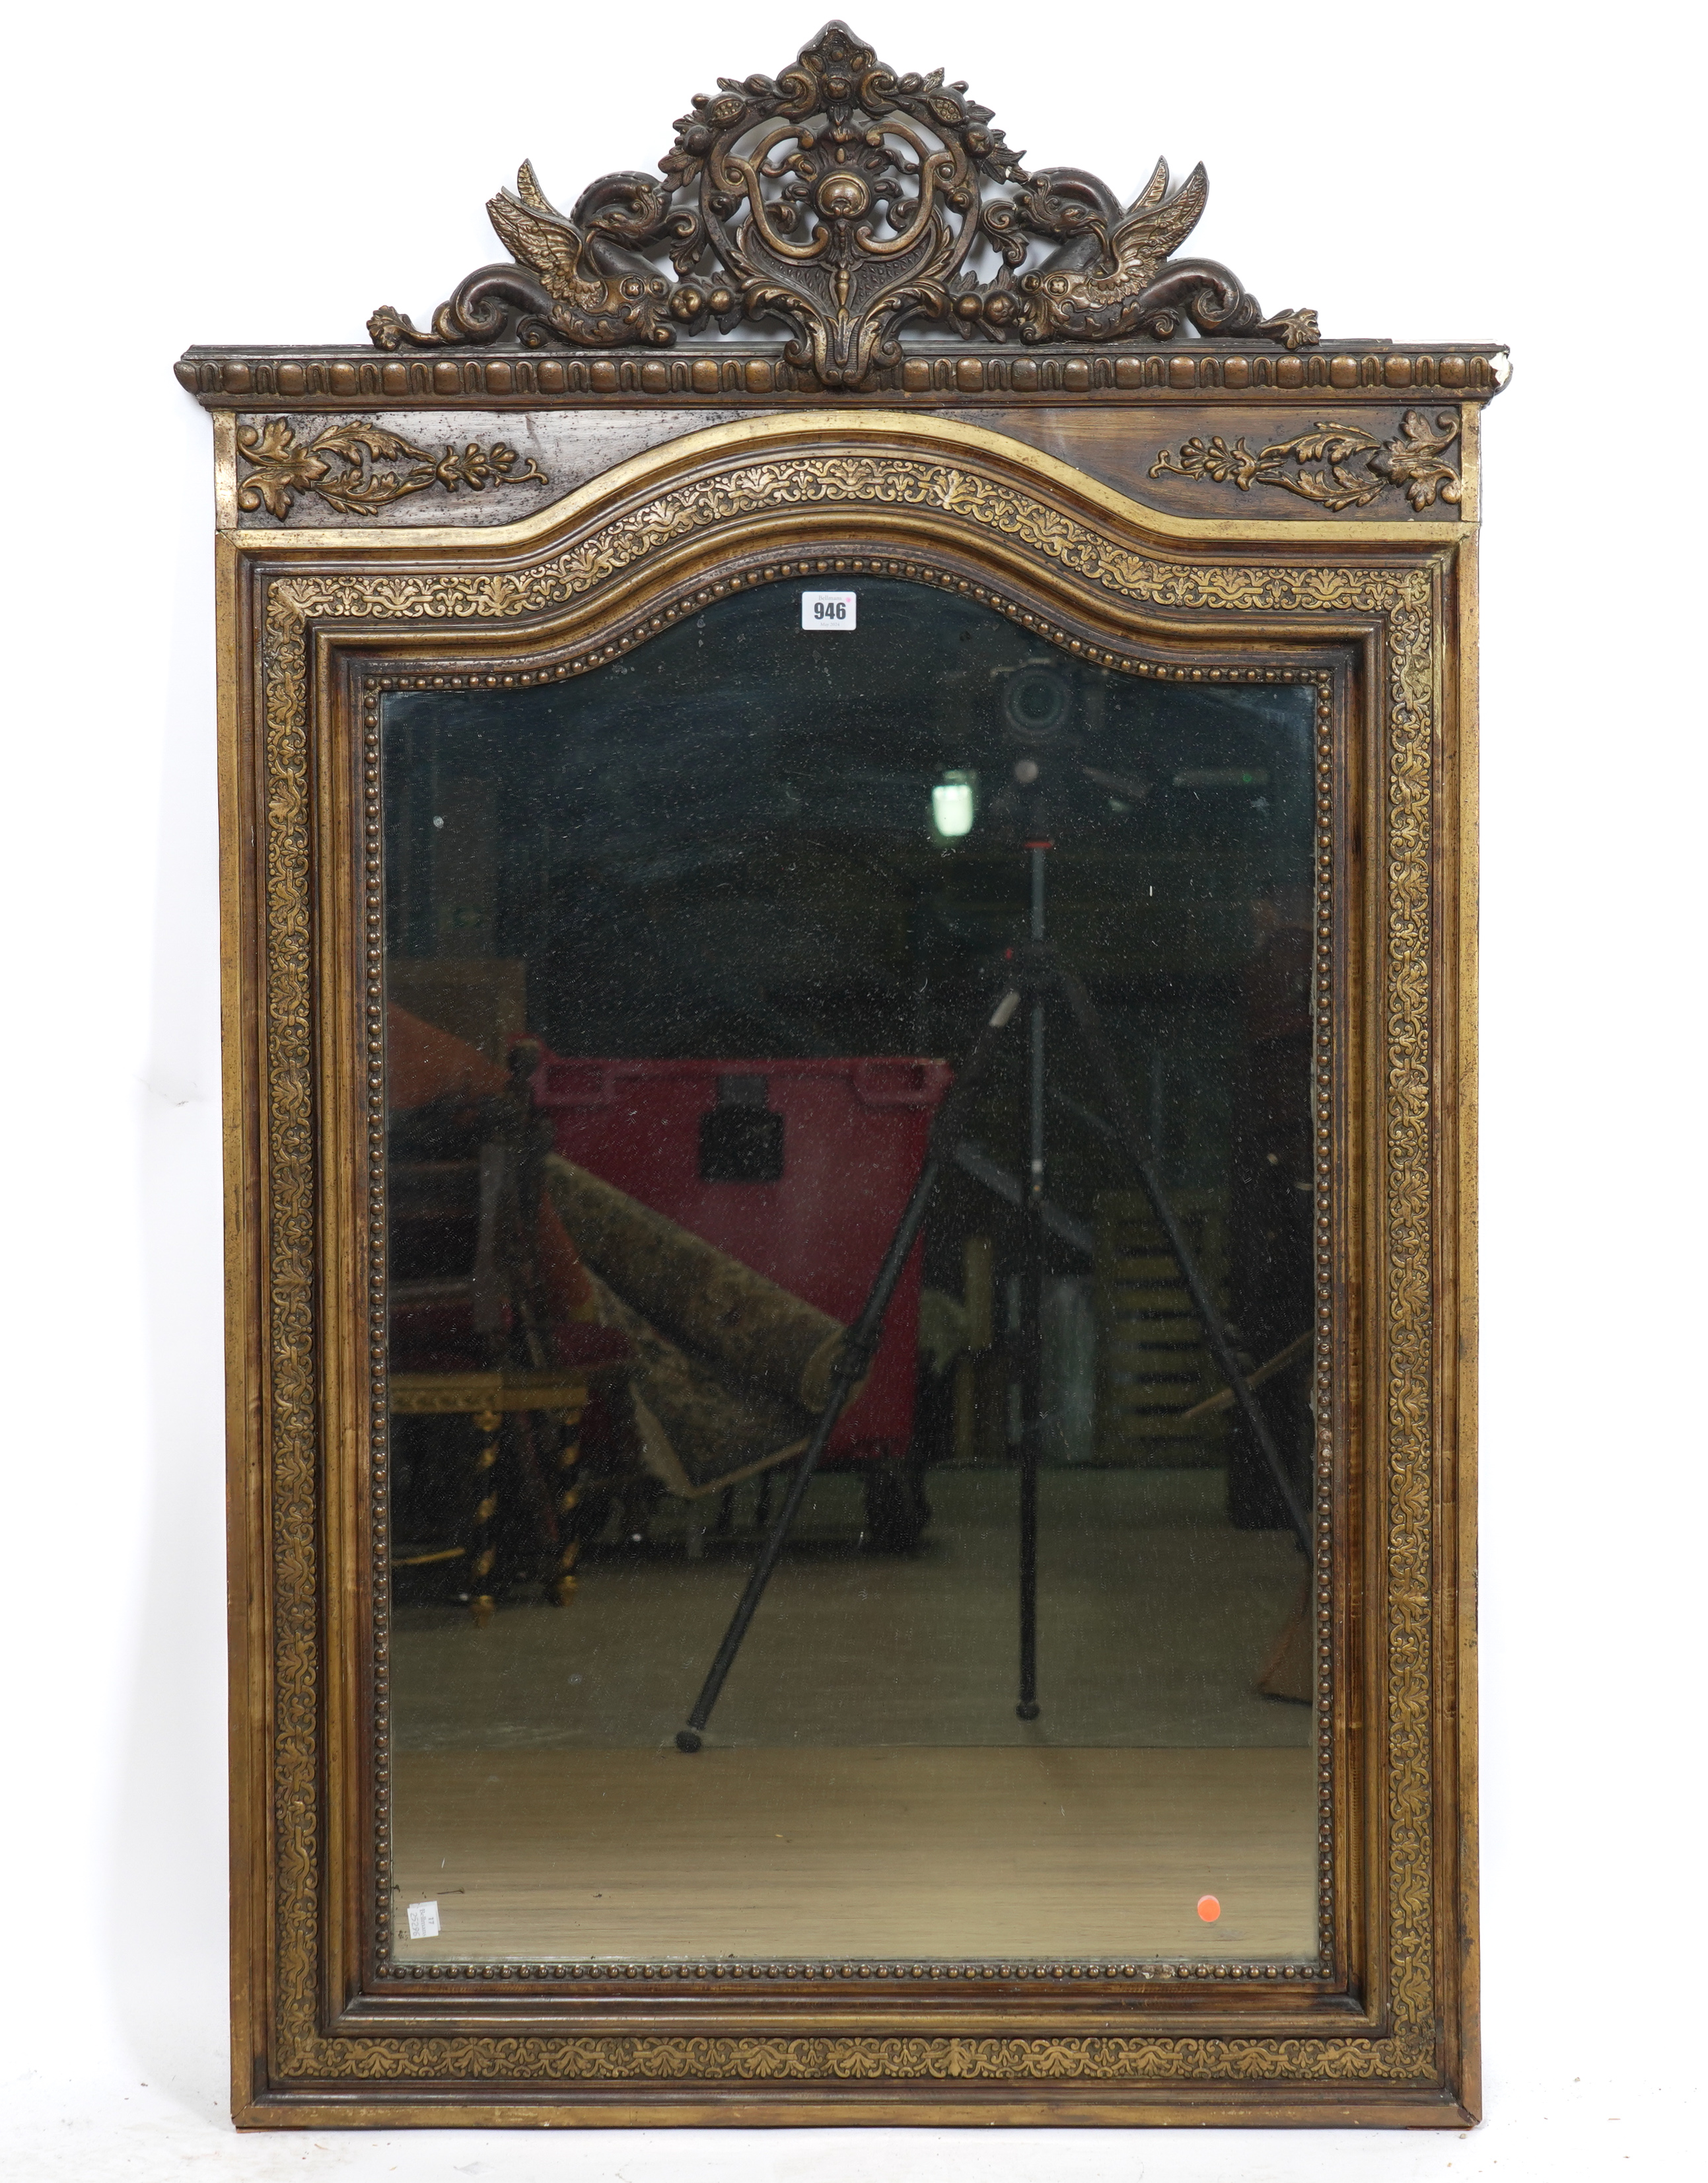 A LATE 19TH CENTURY FRENCH GILT FRAMED RECTANGULAR WALL MIRROR - Image 2 of 3